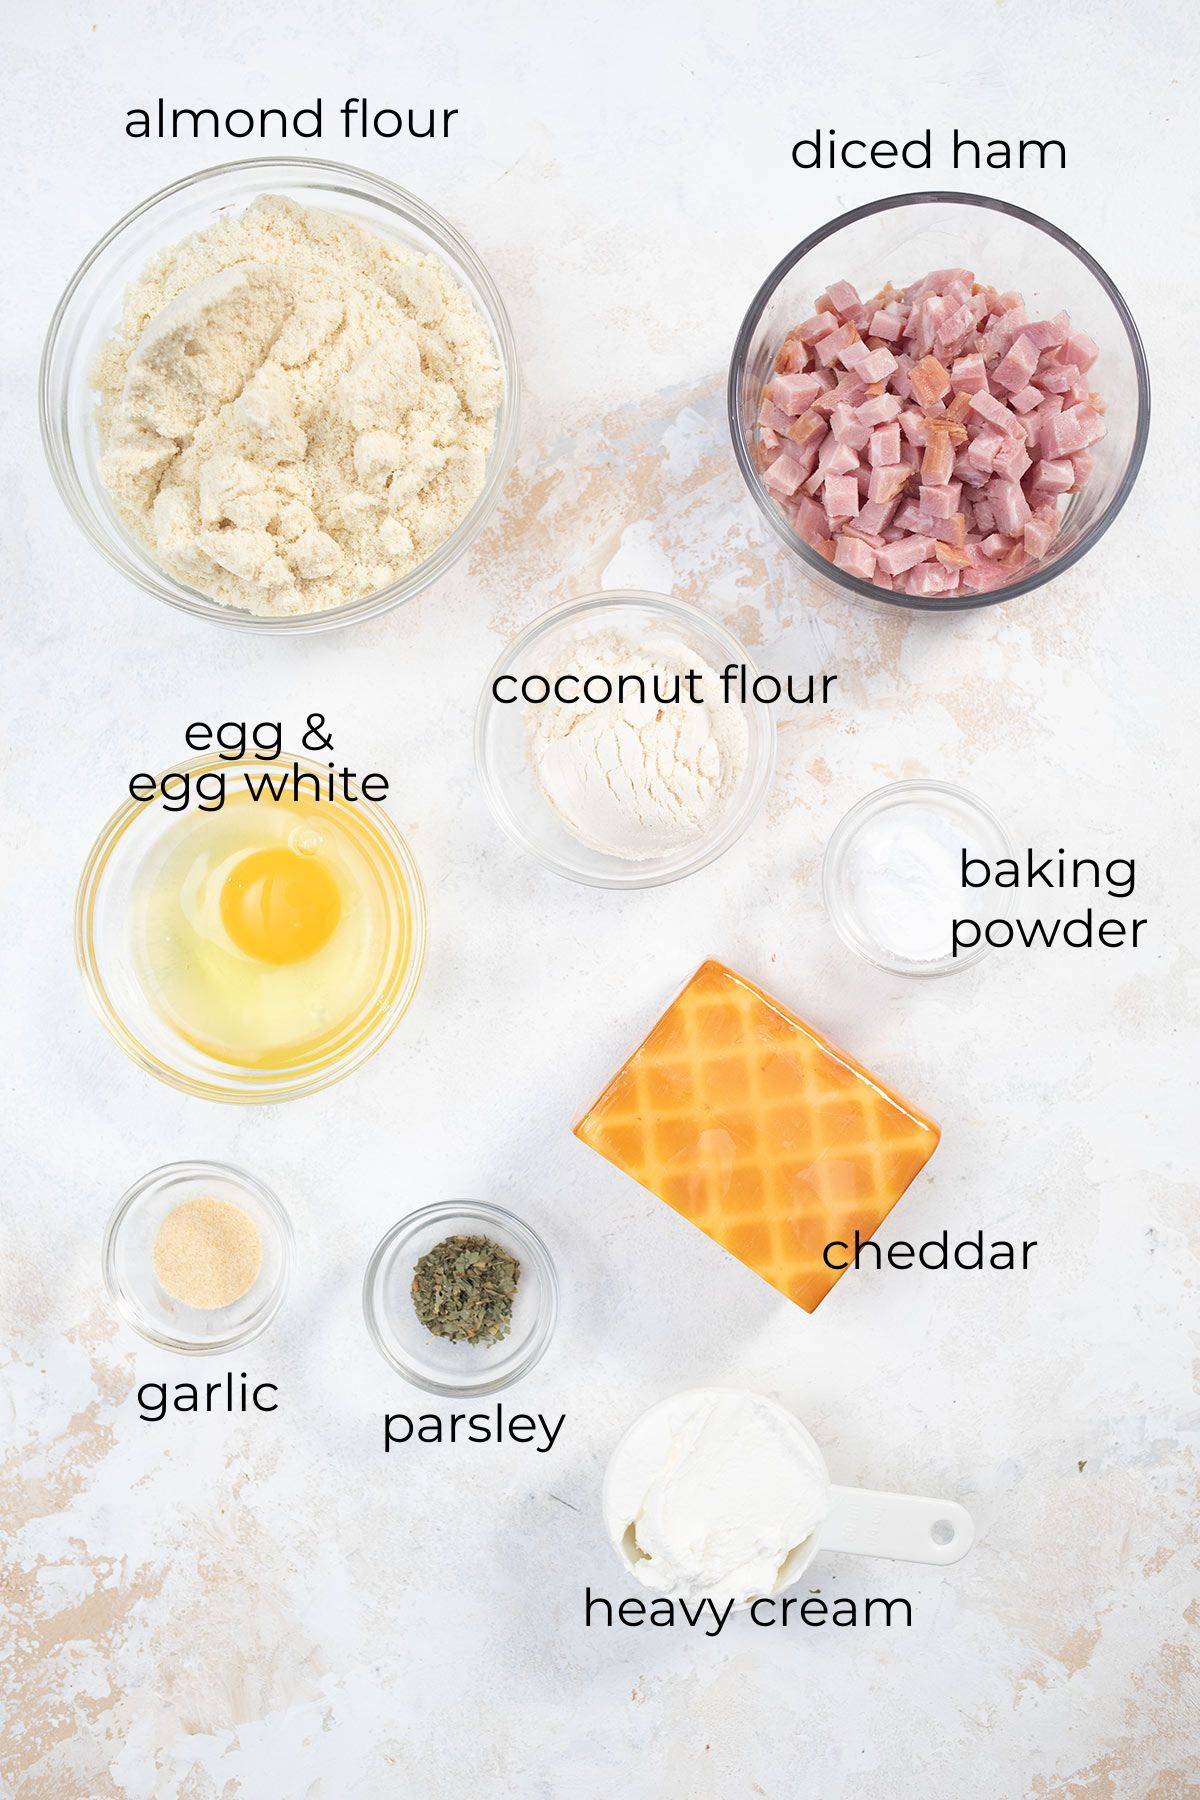 Top down image of ingredients needed for Ham and Cheese Scones.